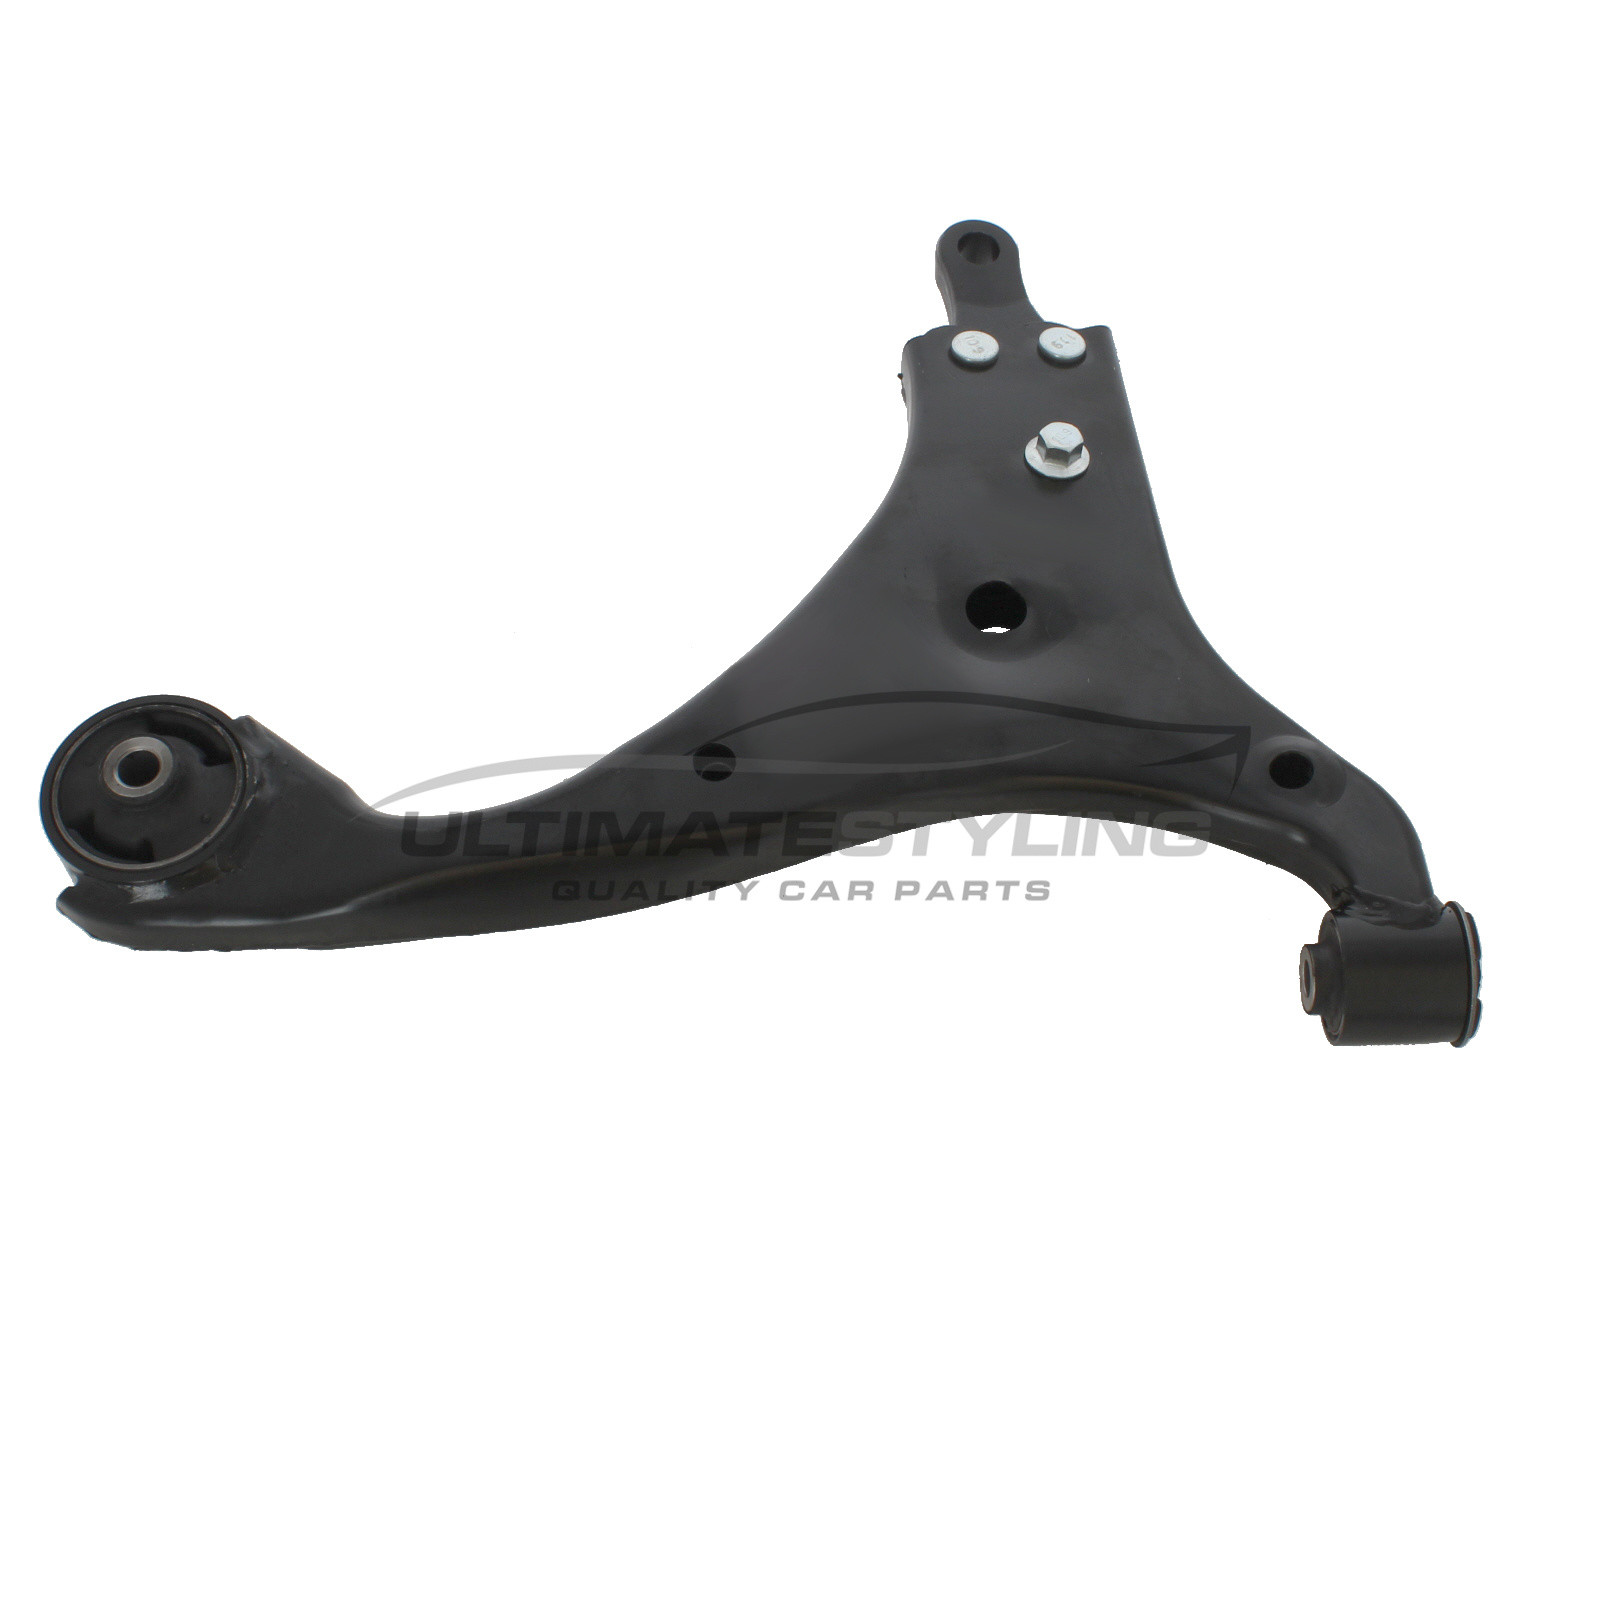 Hyundai i30 2007-2013, Kia Ceed 2007-2013, Kia Pro Ceed 2008-2013 Front Lower Suspension Arm (Steel) Excluding Ball Joint & Including Rear Bush Driver Side (RH)